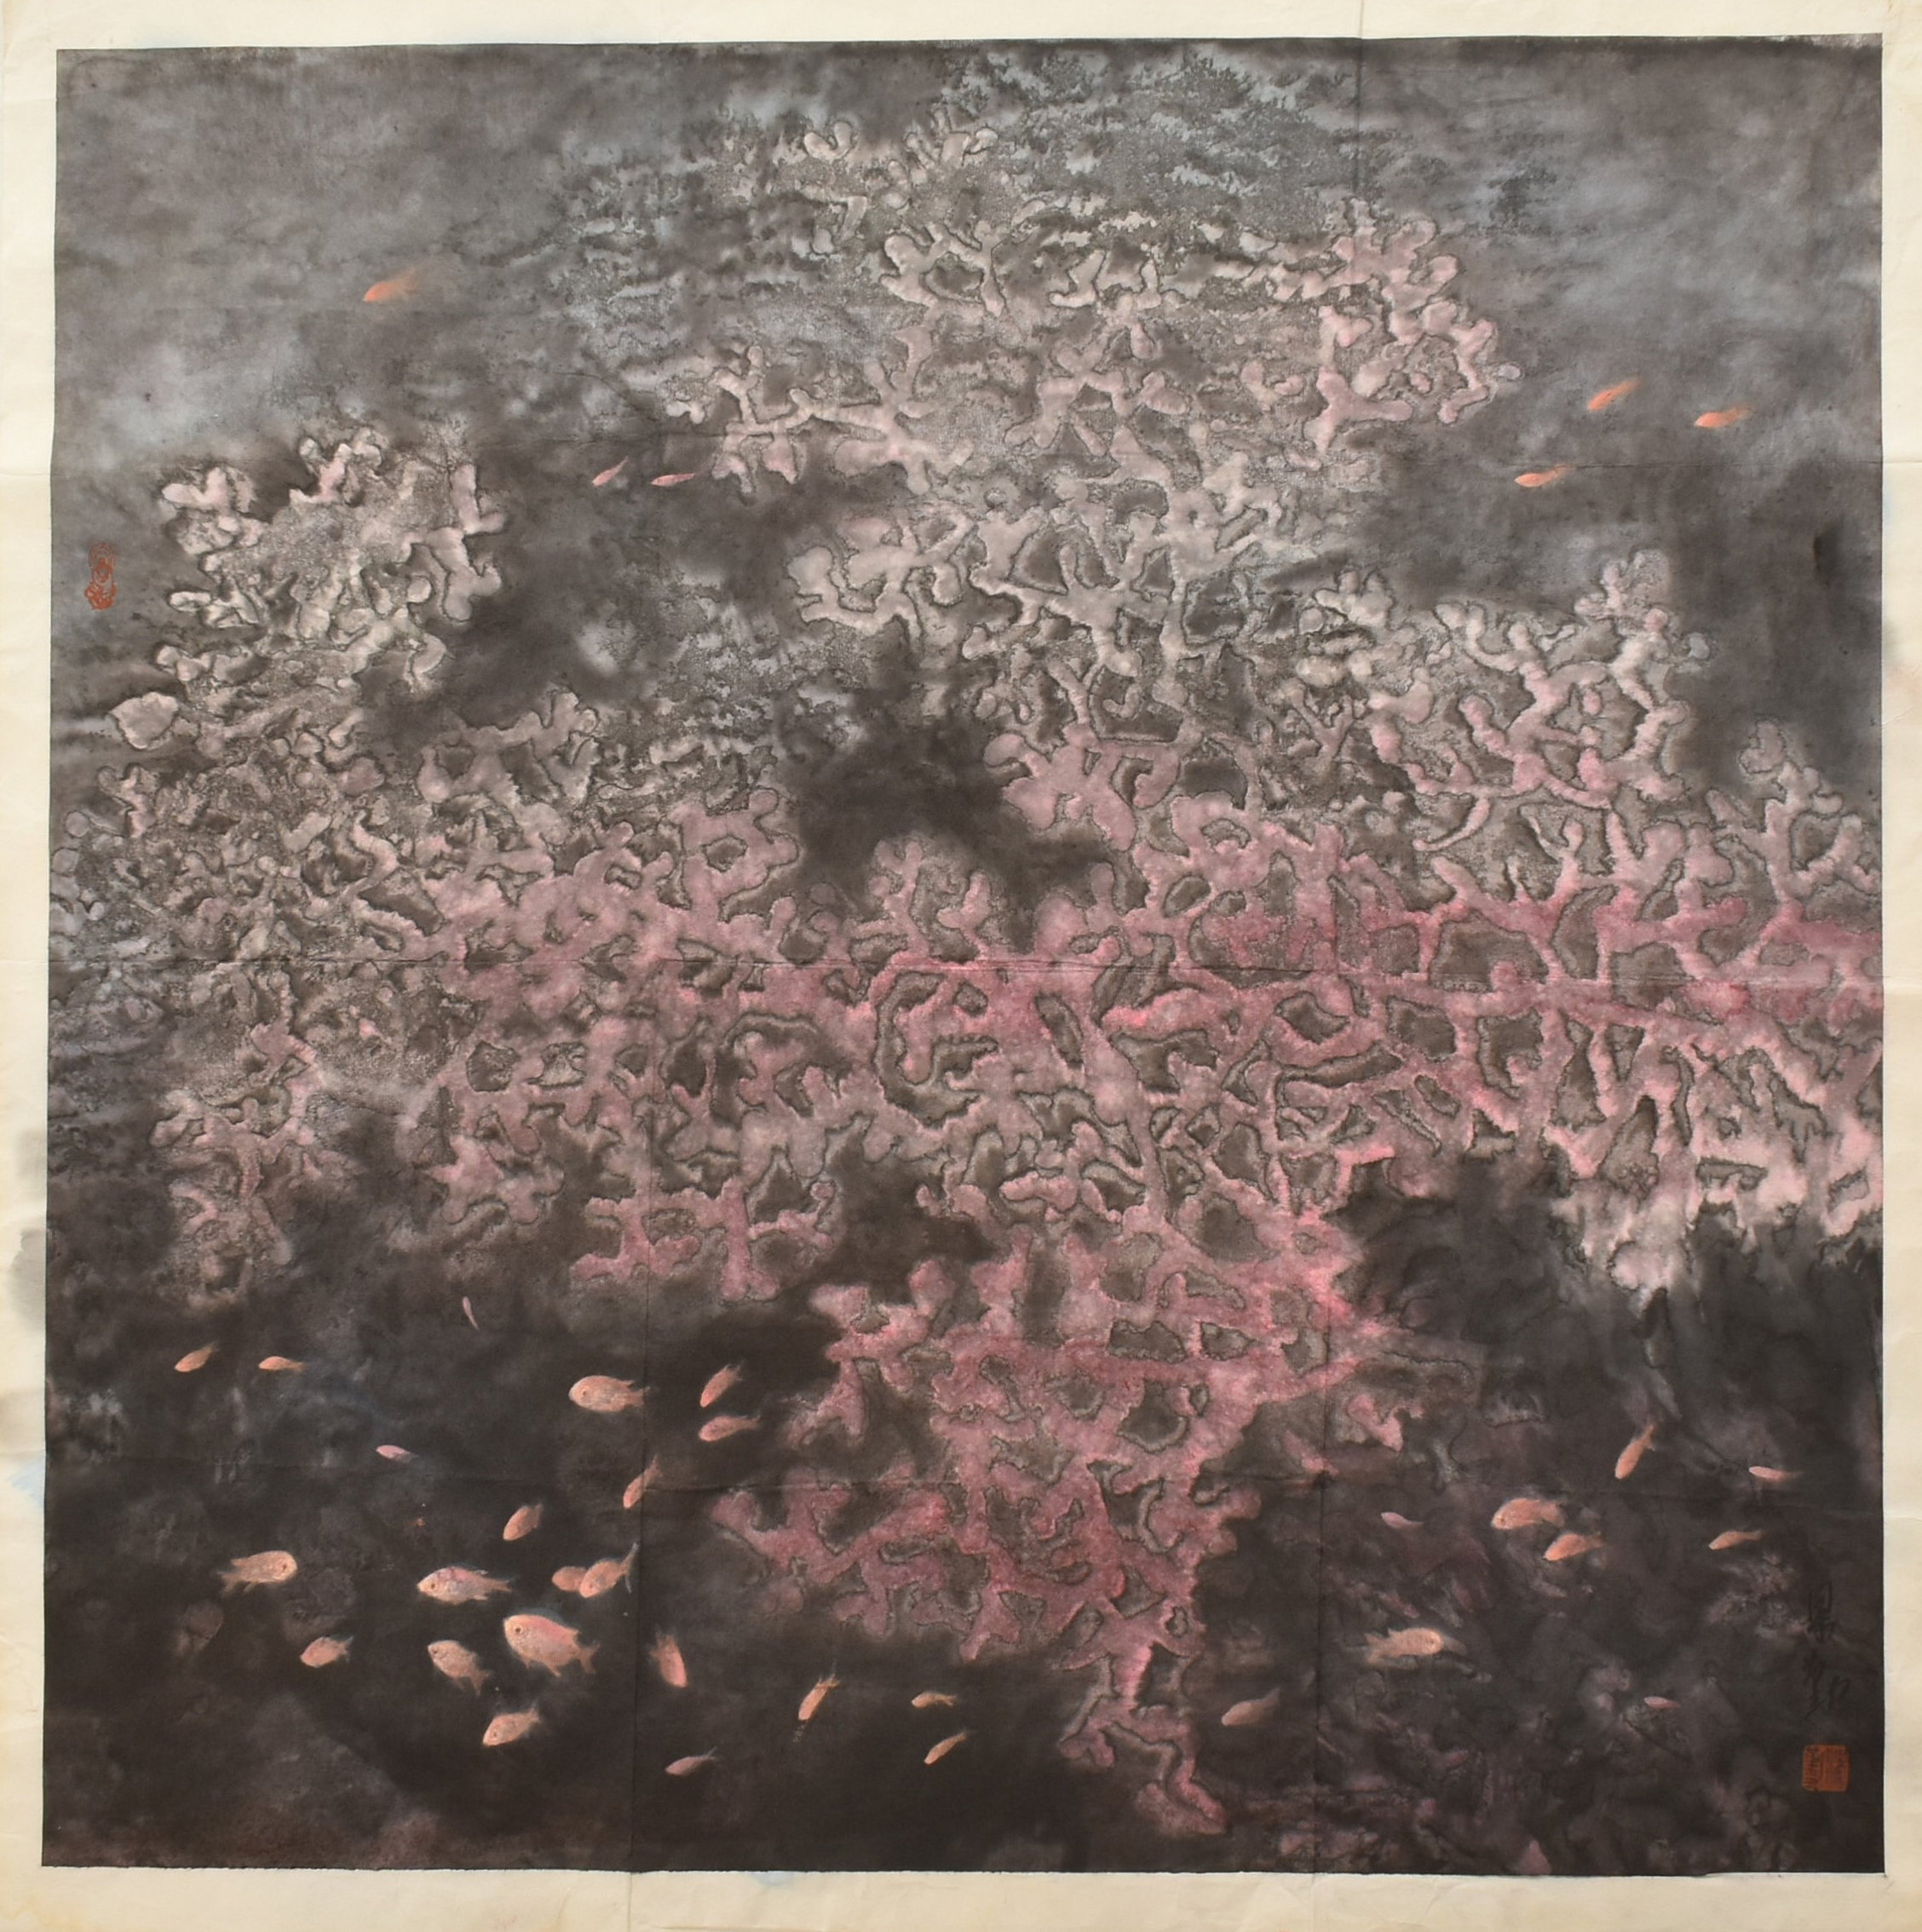 GUO QIN 果勤 - CORAL AND FISHES 珊瑚和鱼 - Image 2 of 6